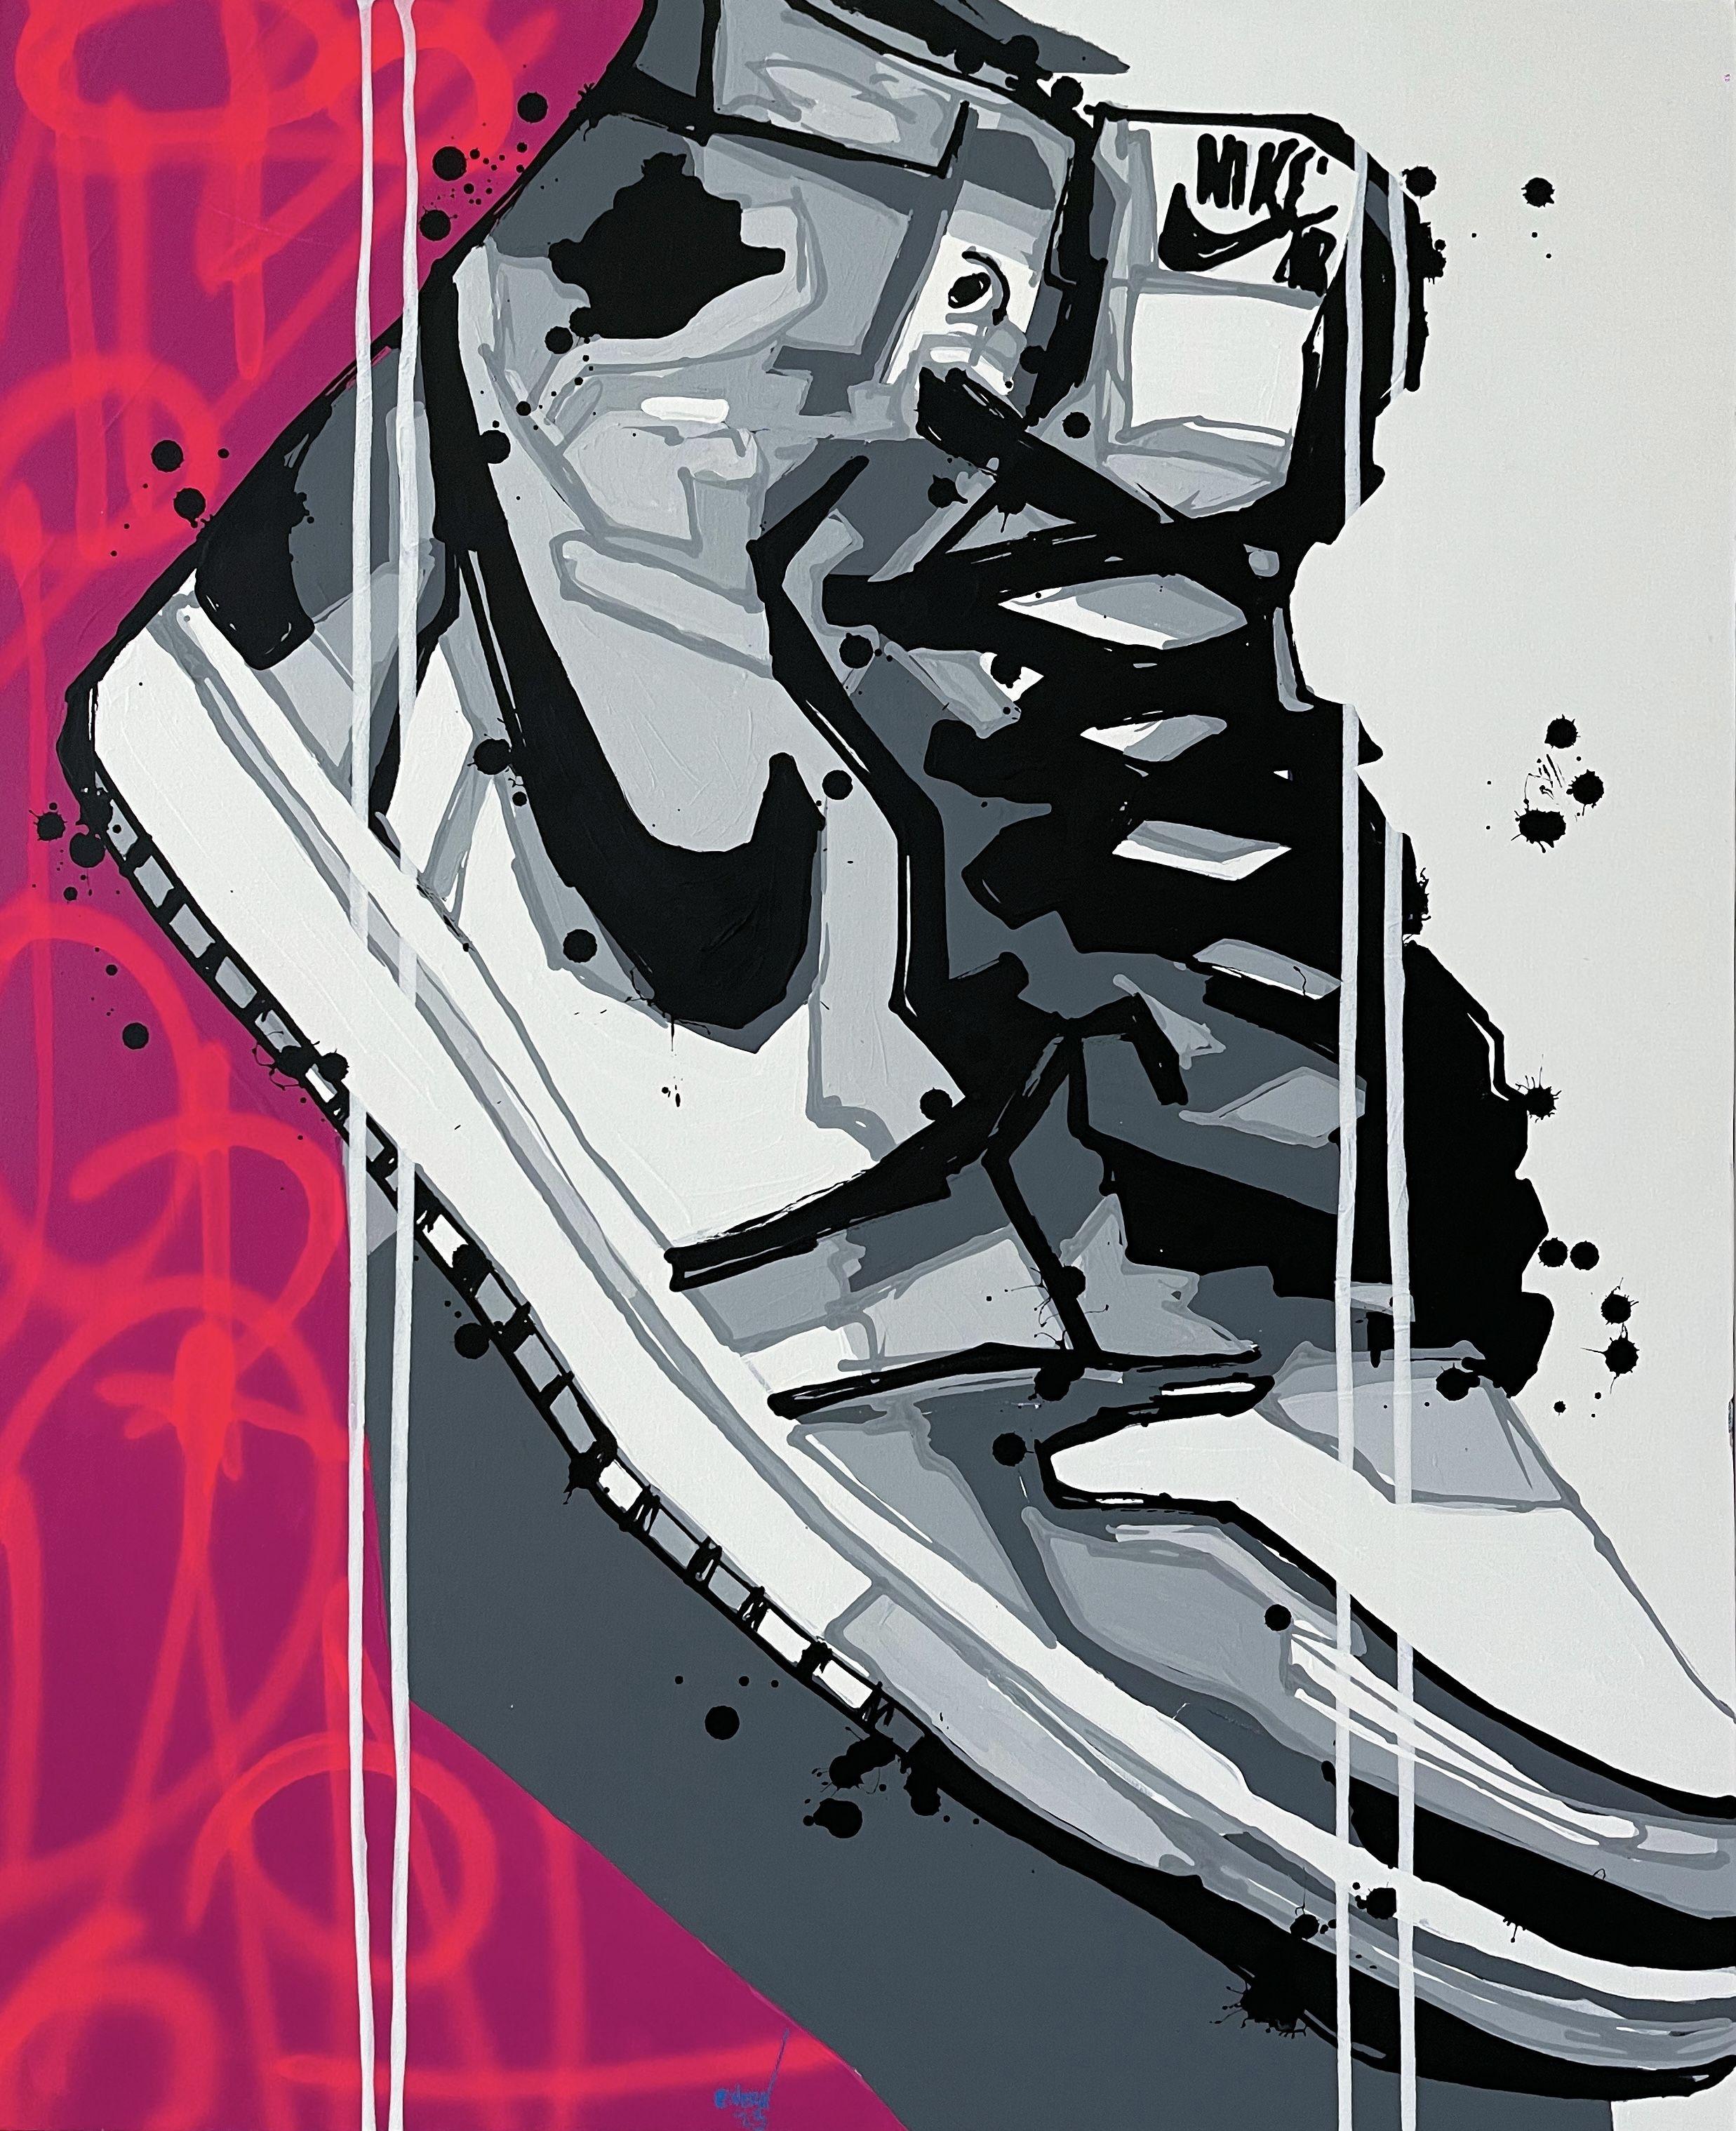 The artworks in this Limited Edition Series are visually striking and capture the iconic design of the Air Jordan 1 shoes in a bold and energetic way. The use of acrylic and spray paint adds depth and texture to the pieces, creating a sense of